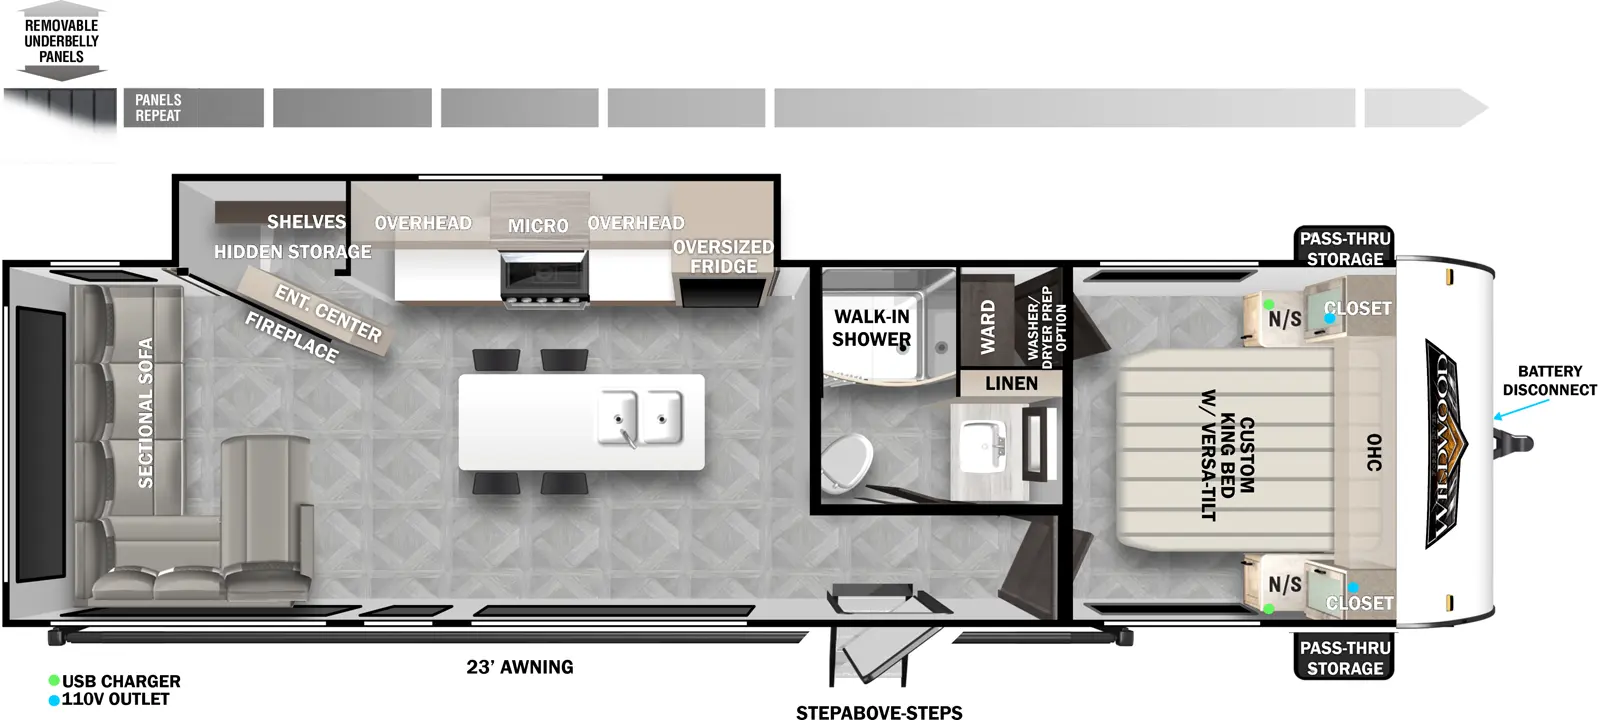 The 28VIEW has one slideout and one entry. Exterior features removable underbelly panels, 23 foot awning, battery disconnect, StepAbove steps, and front pass-thru storage. Interior layout front to back: foot facing custom king bed with versa-tilt, overhead cabinet, closet and nightstand on each side, and off-door side wardrobe with optional washer/dryer prep; off-door side full bathroom with walk-in shower and linen closet; entry door outside of bathroom; off-door side slideout with oversized refrigerator, overhead cabinets, microwave, and entertainment center with fireplace, and hidden storage shelves behind; kitchen island with sink and bar stools; sectional sofa wraps around the rear to the door side.